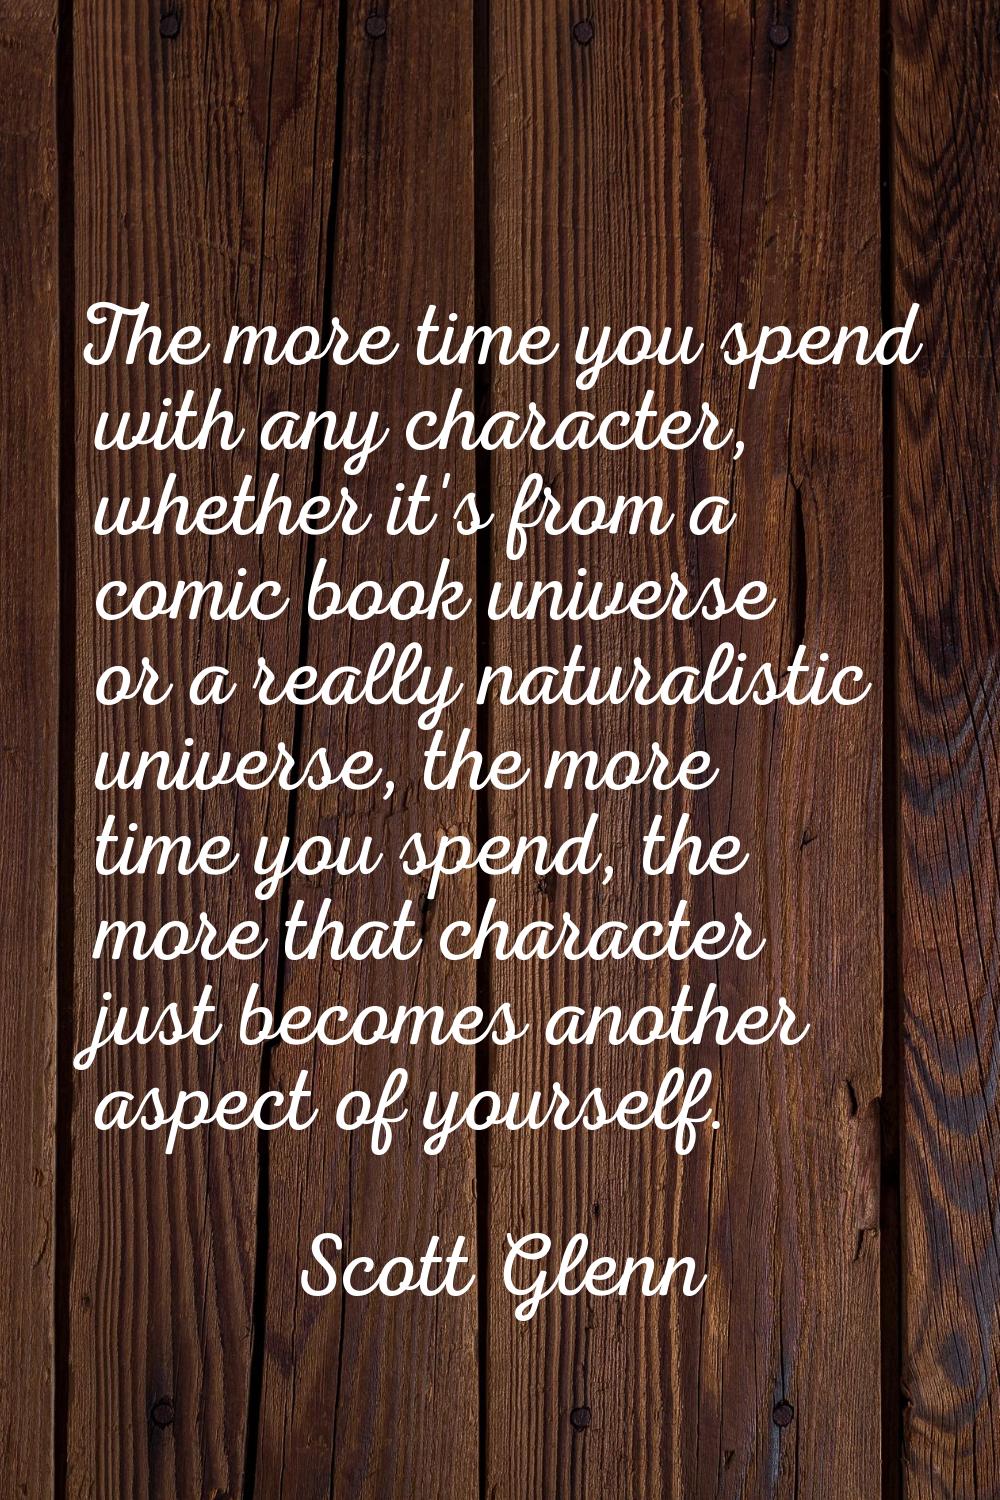 The more time you spend with any character, whether it's from a comic book universe or a really nat